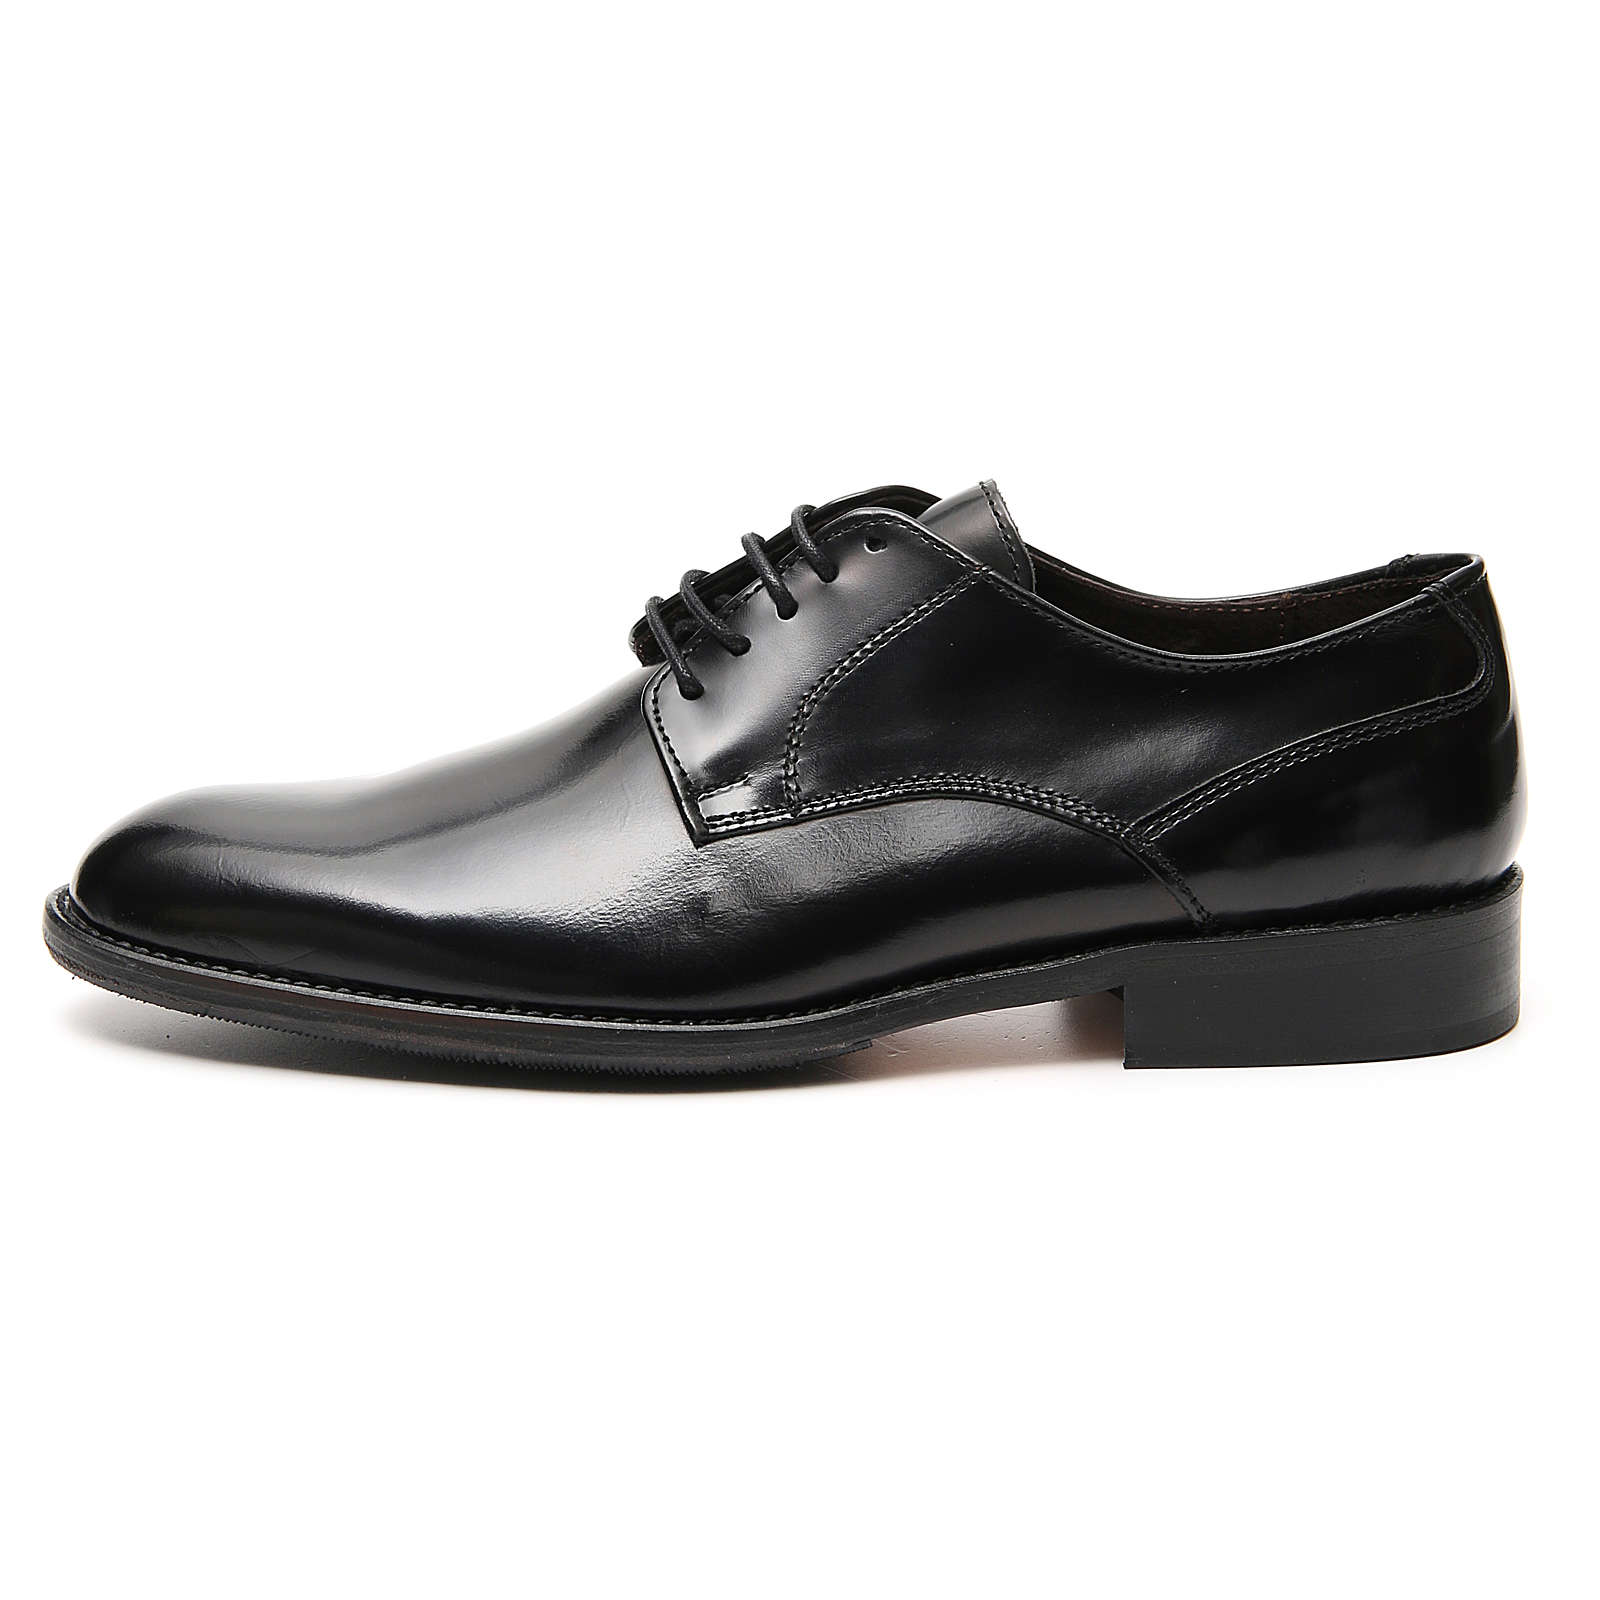 Shoes in polished real black leather | online sales on HOLYART.co.uk